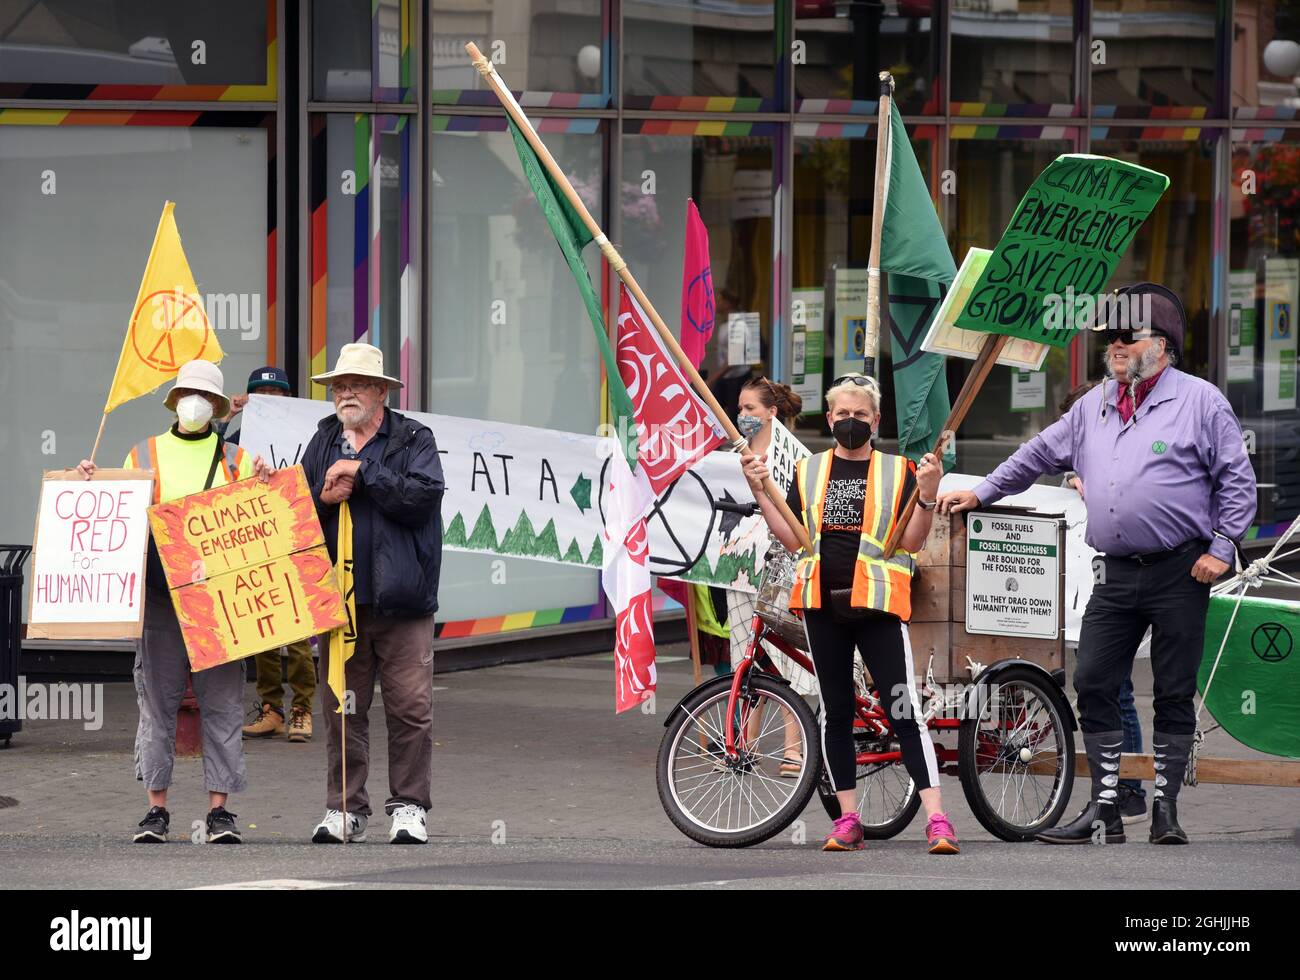 Demonstrators from the Extinction Rebellion organization, protest against old growth logging, fossil fuels and climate change in Victoria, British Col Stock Photo